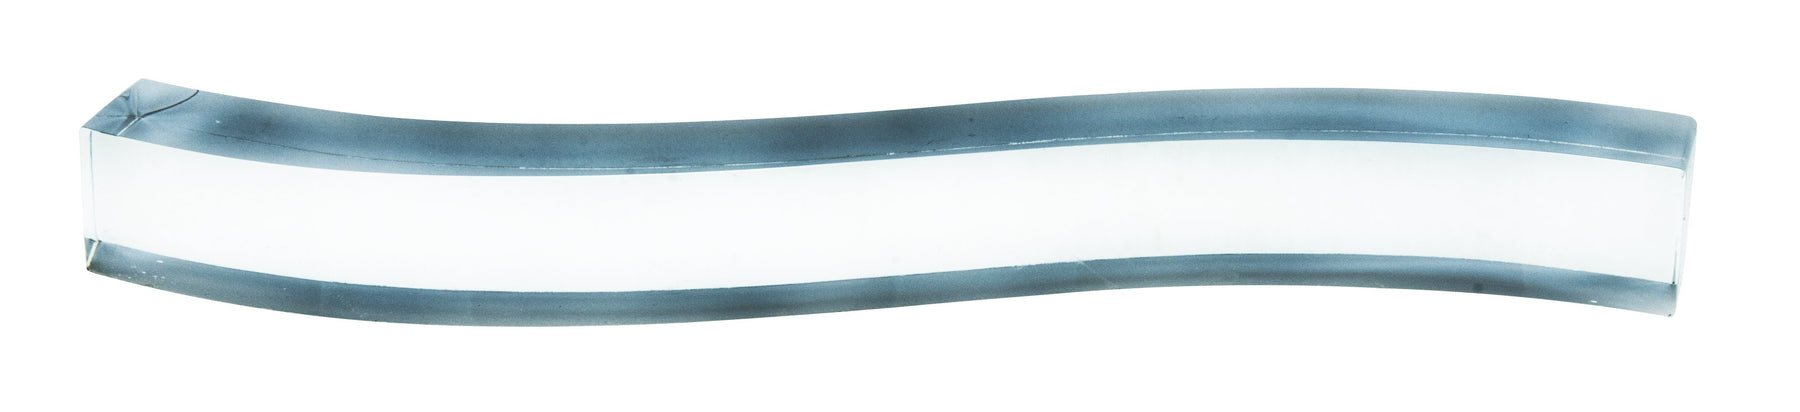 Eisco Labs Acrylic Light Guide Demonstrator, For use with Ray Box, 220mm long